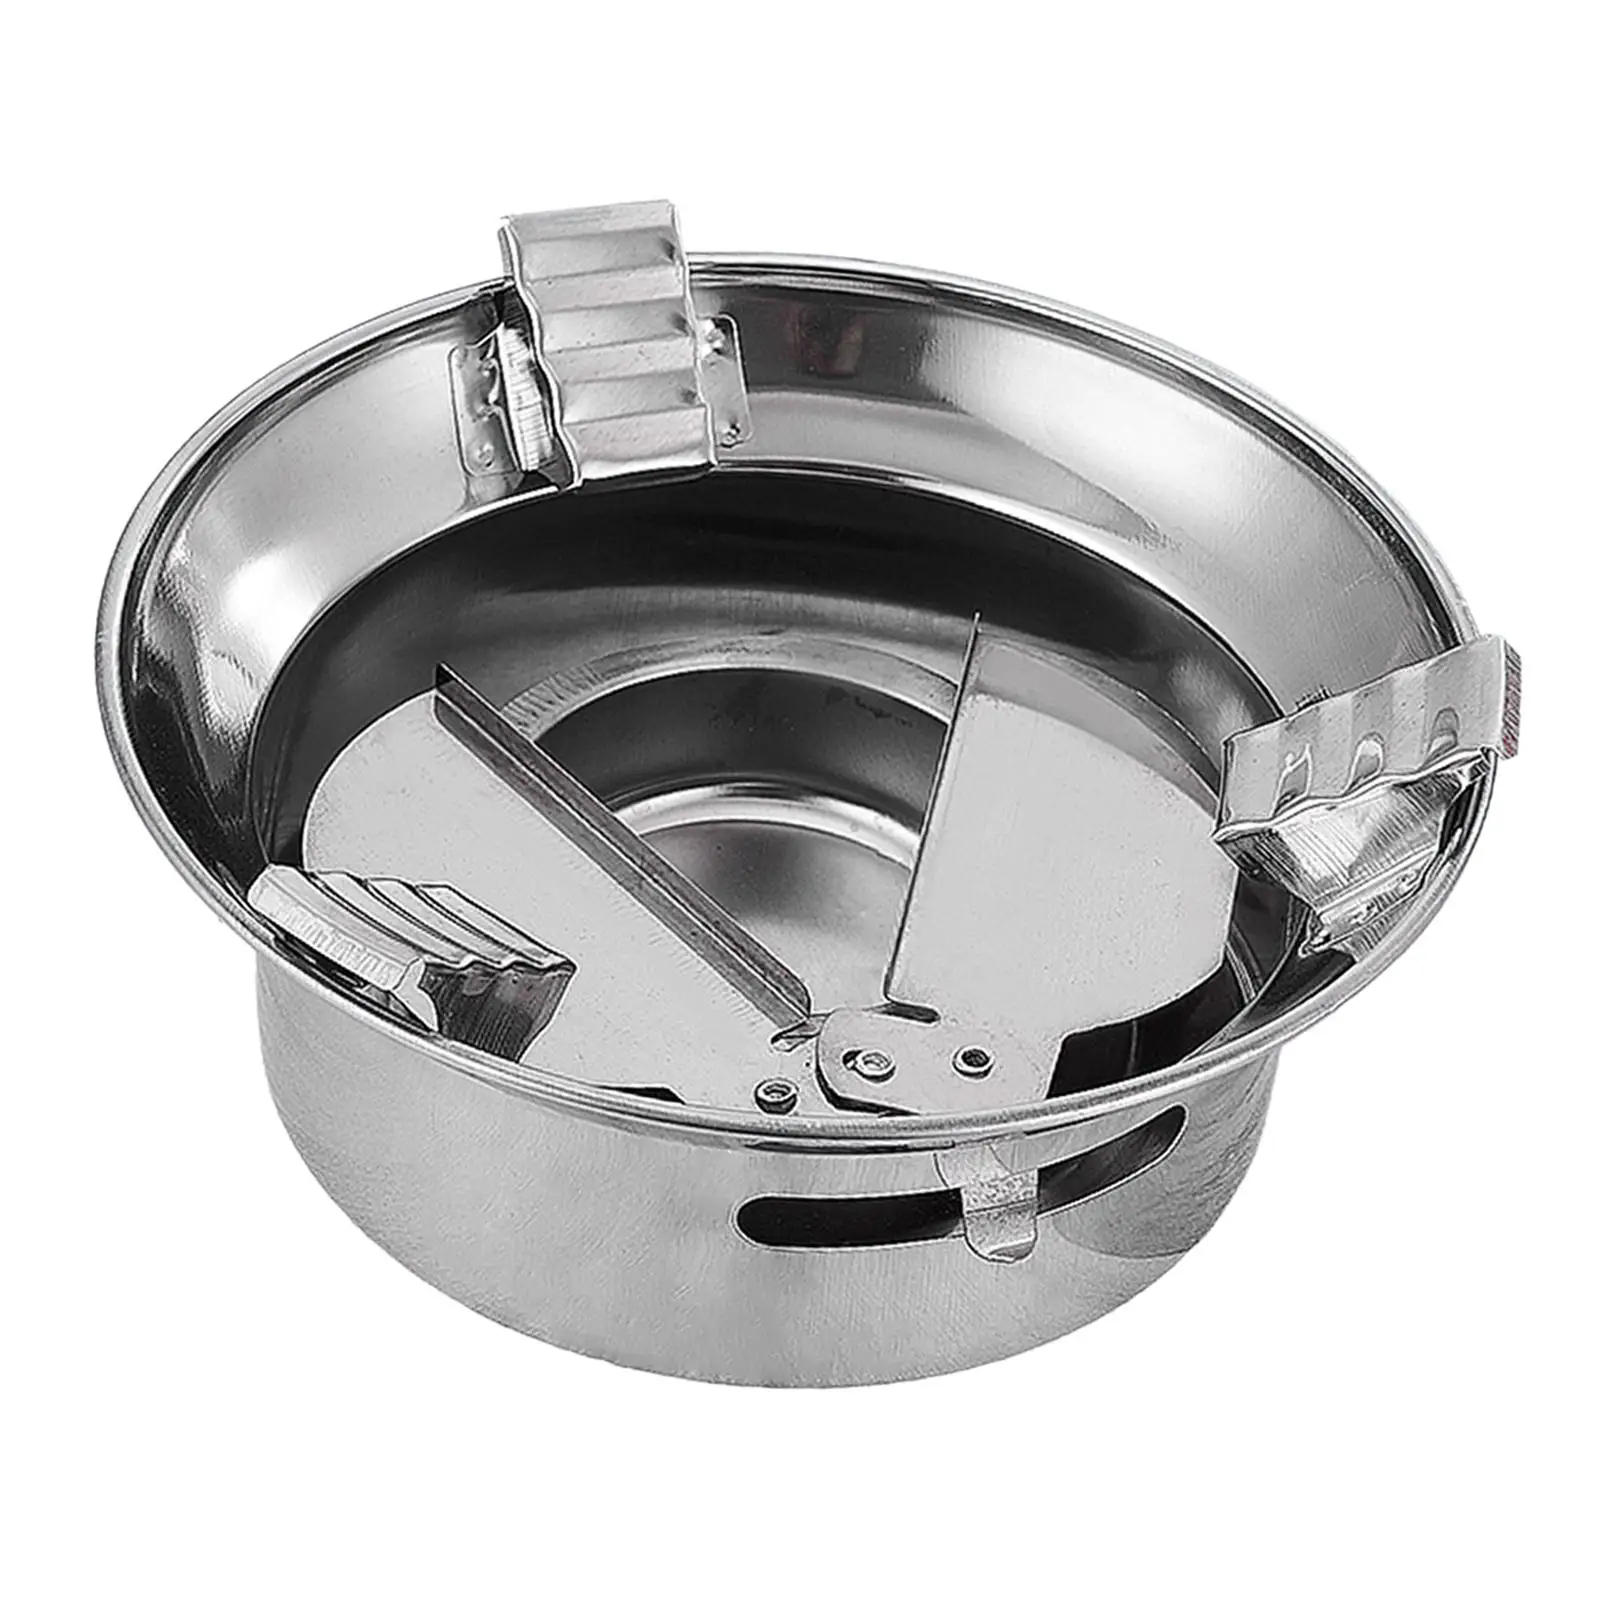 Outdoor Alcohol Stove Stainless Steel for Hiking Fishing Picnic Lightweight